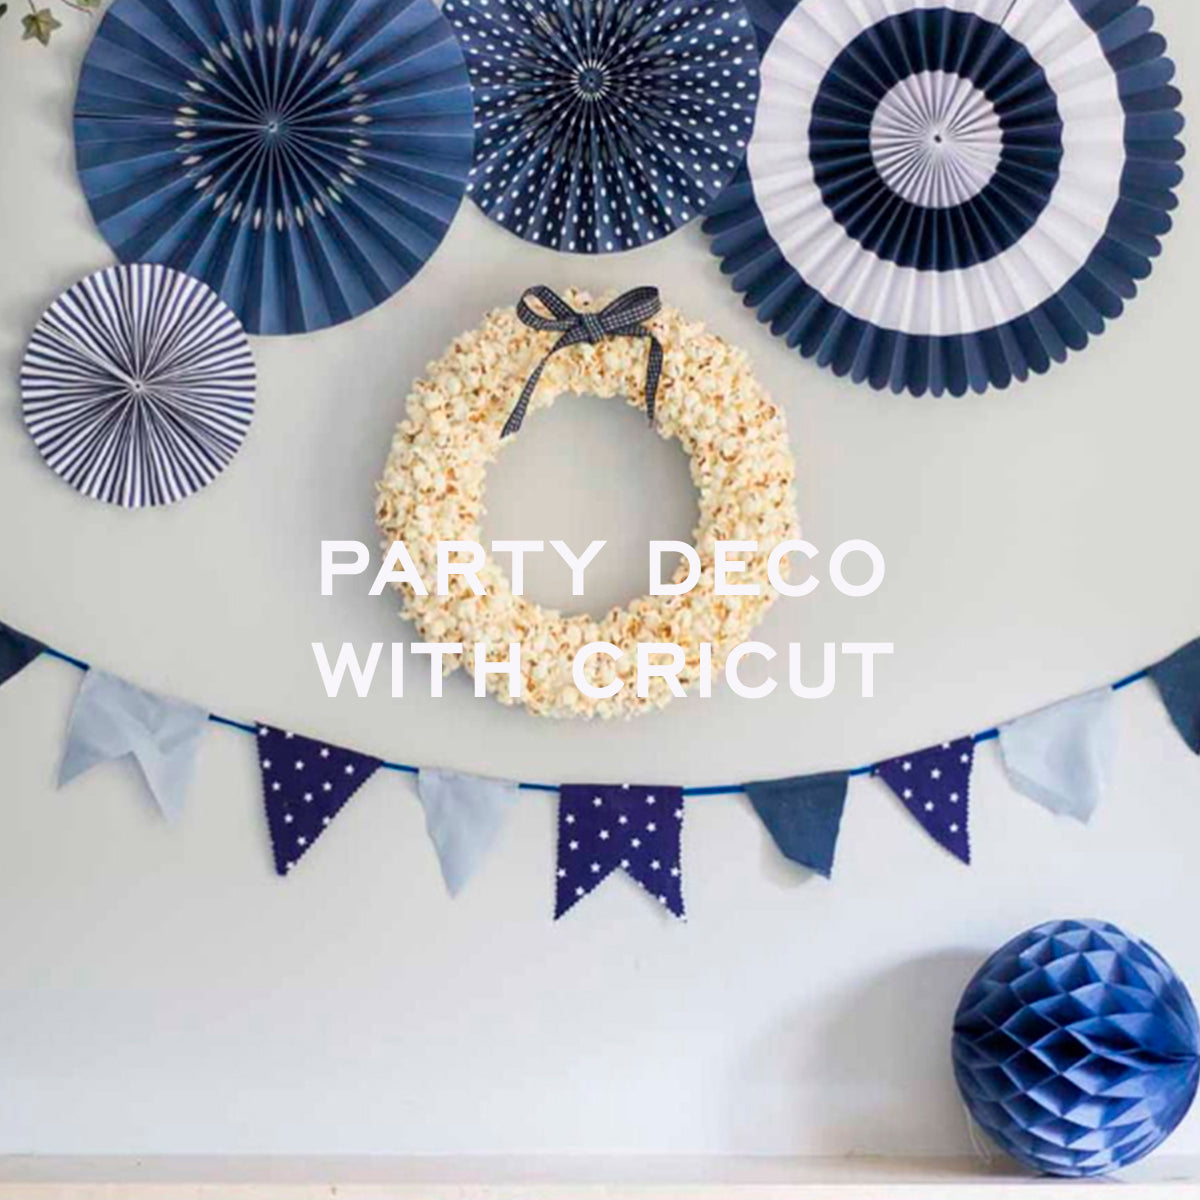 Party Deco with Cricut